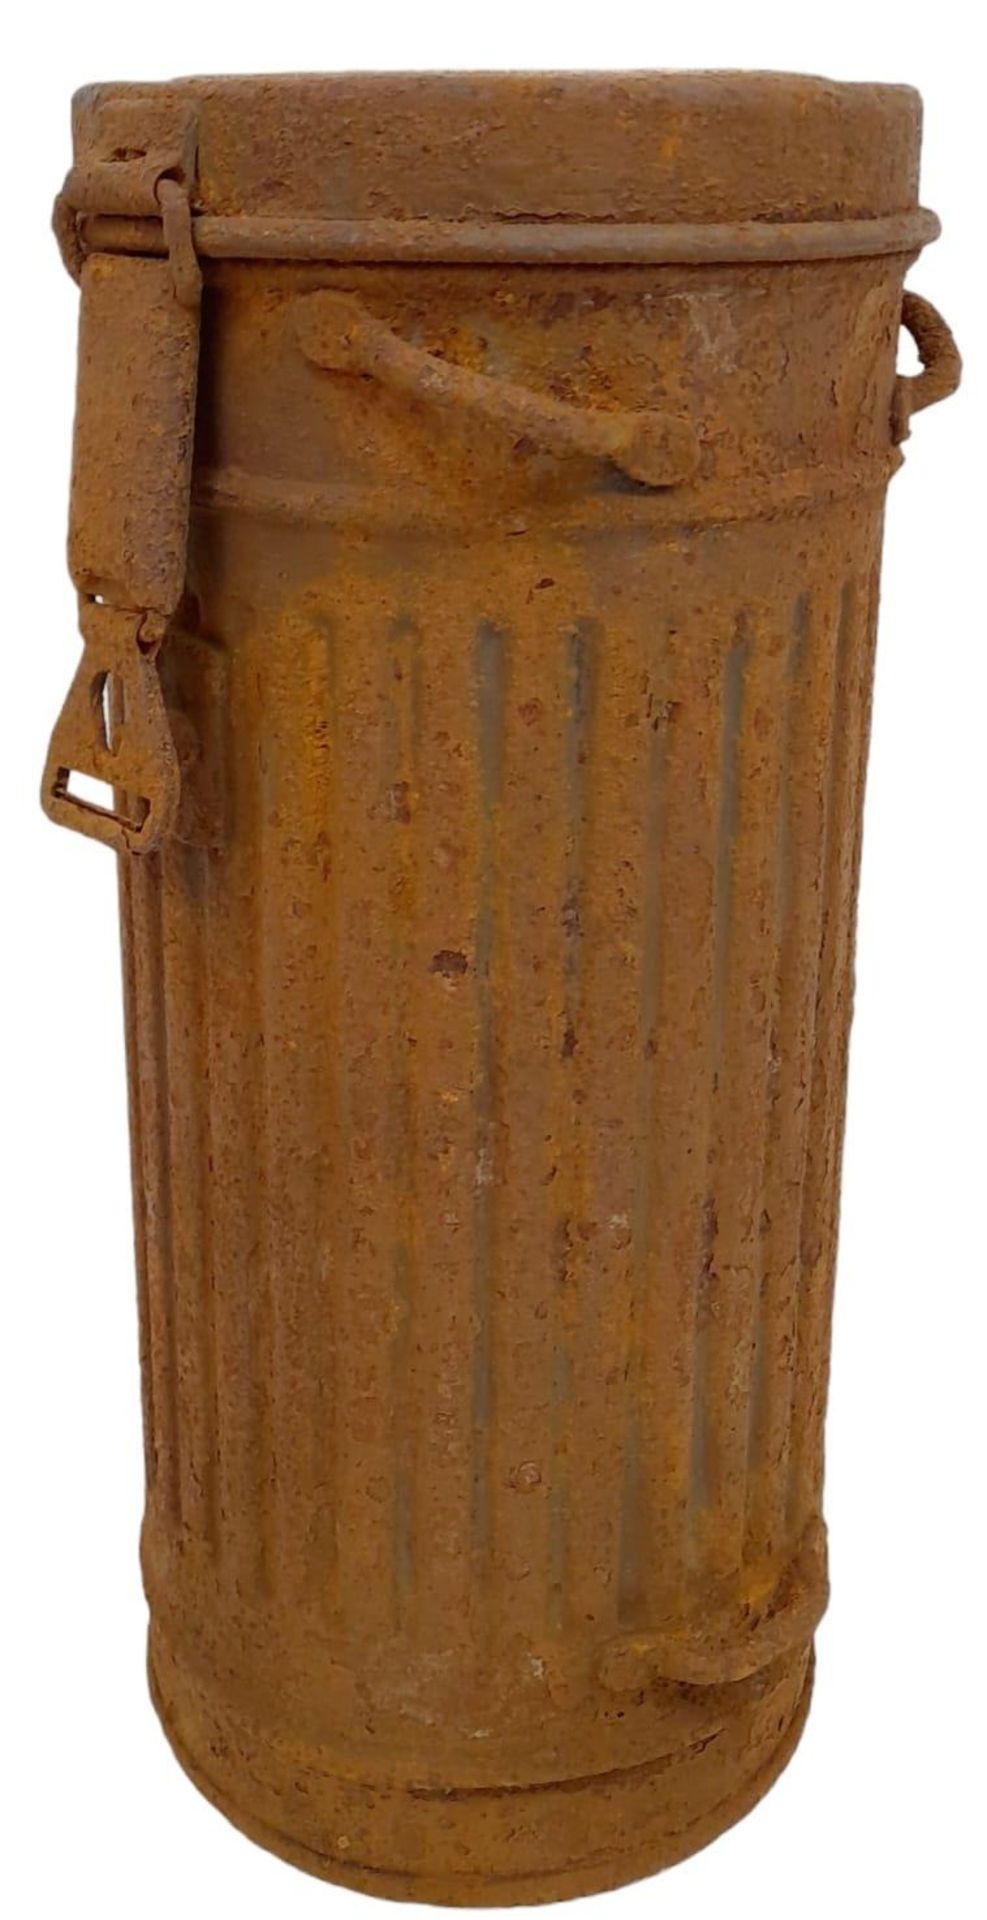 Semi Relic WW2 German Medics Gas Mask Canister. With remains of Normandy Camouflage - Image 3 of 9